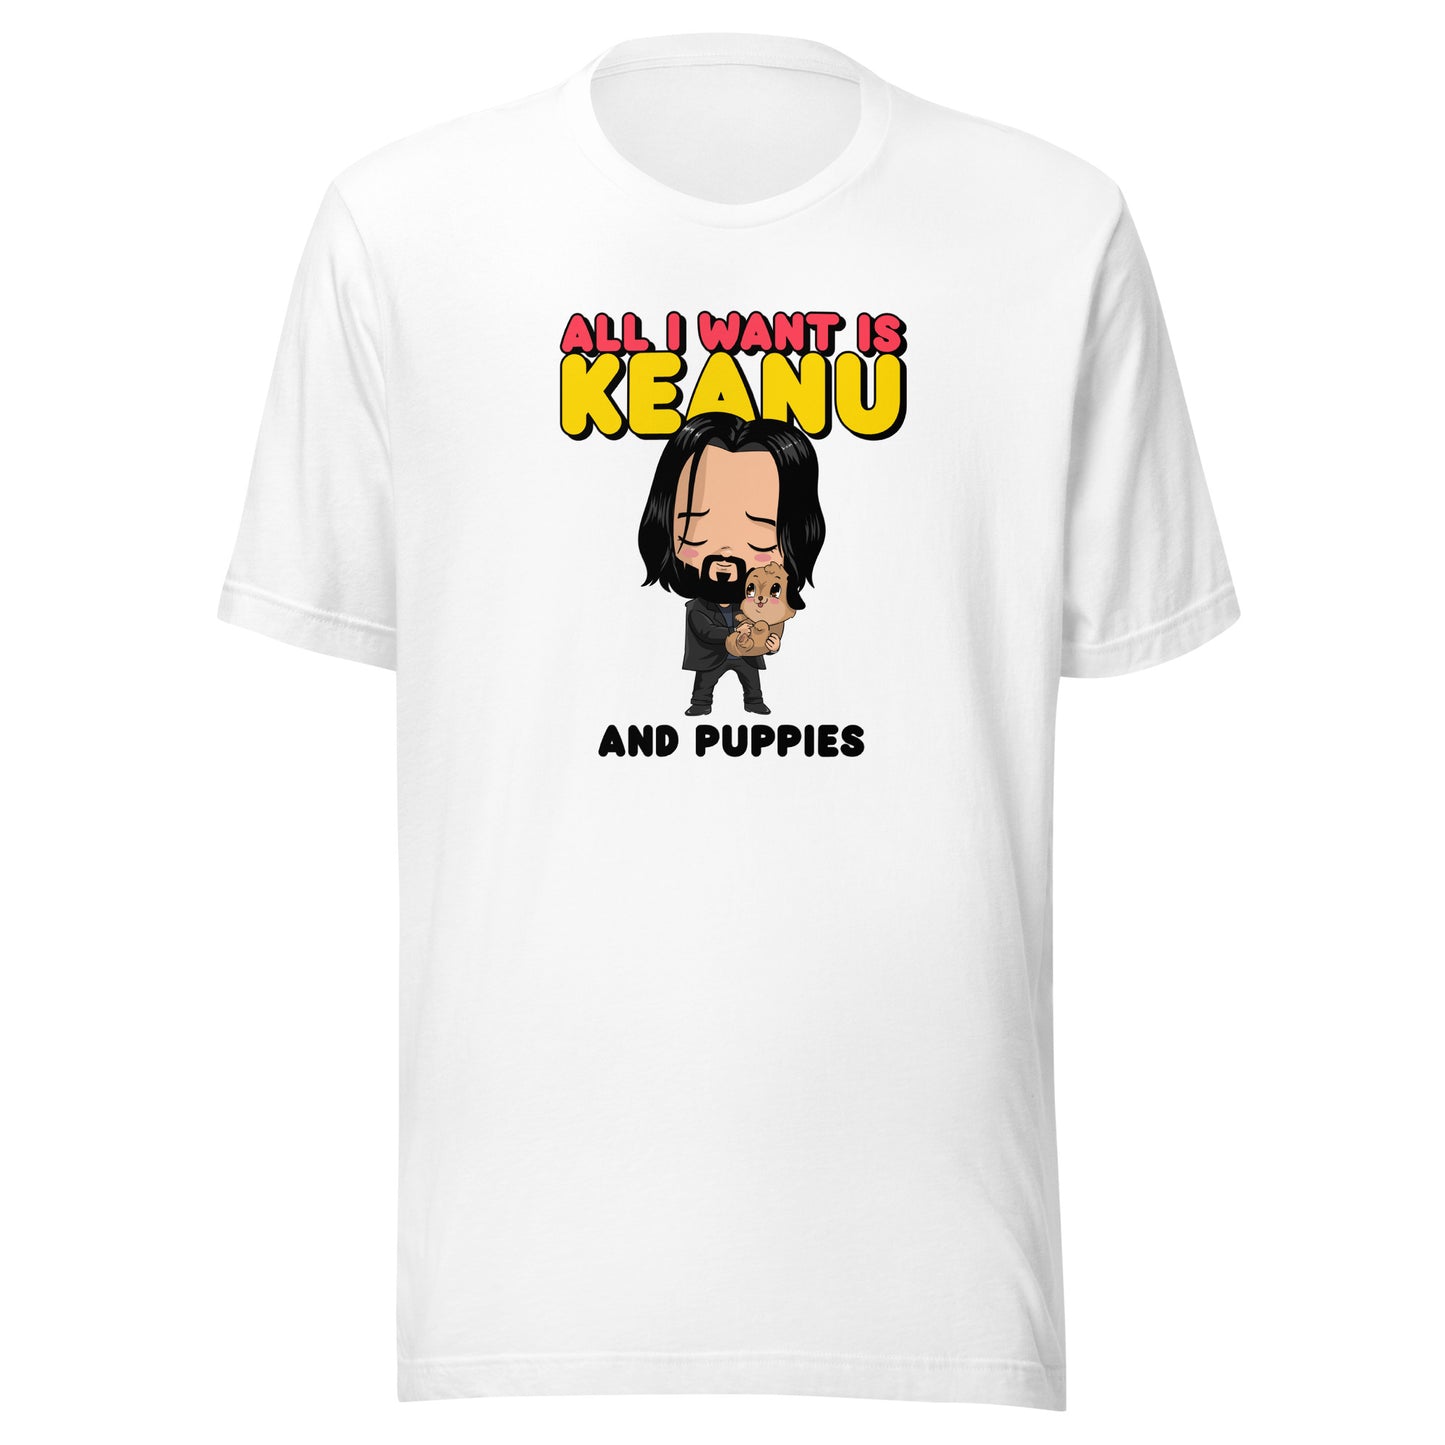 All I Want is Keanu and Puppies Unisex t-shirt